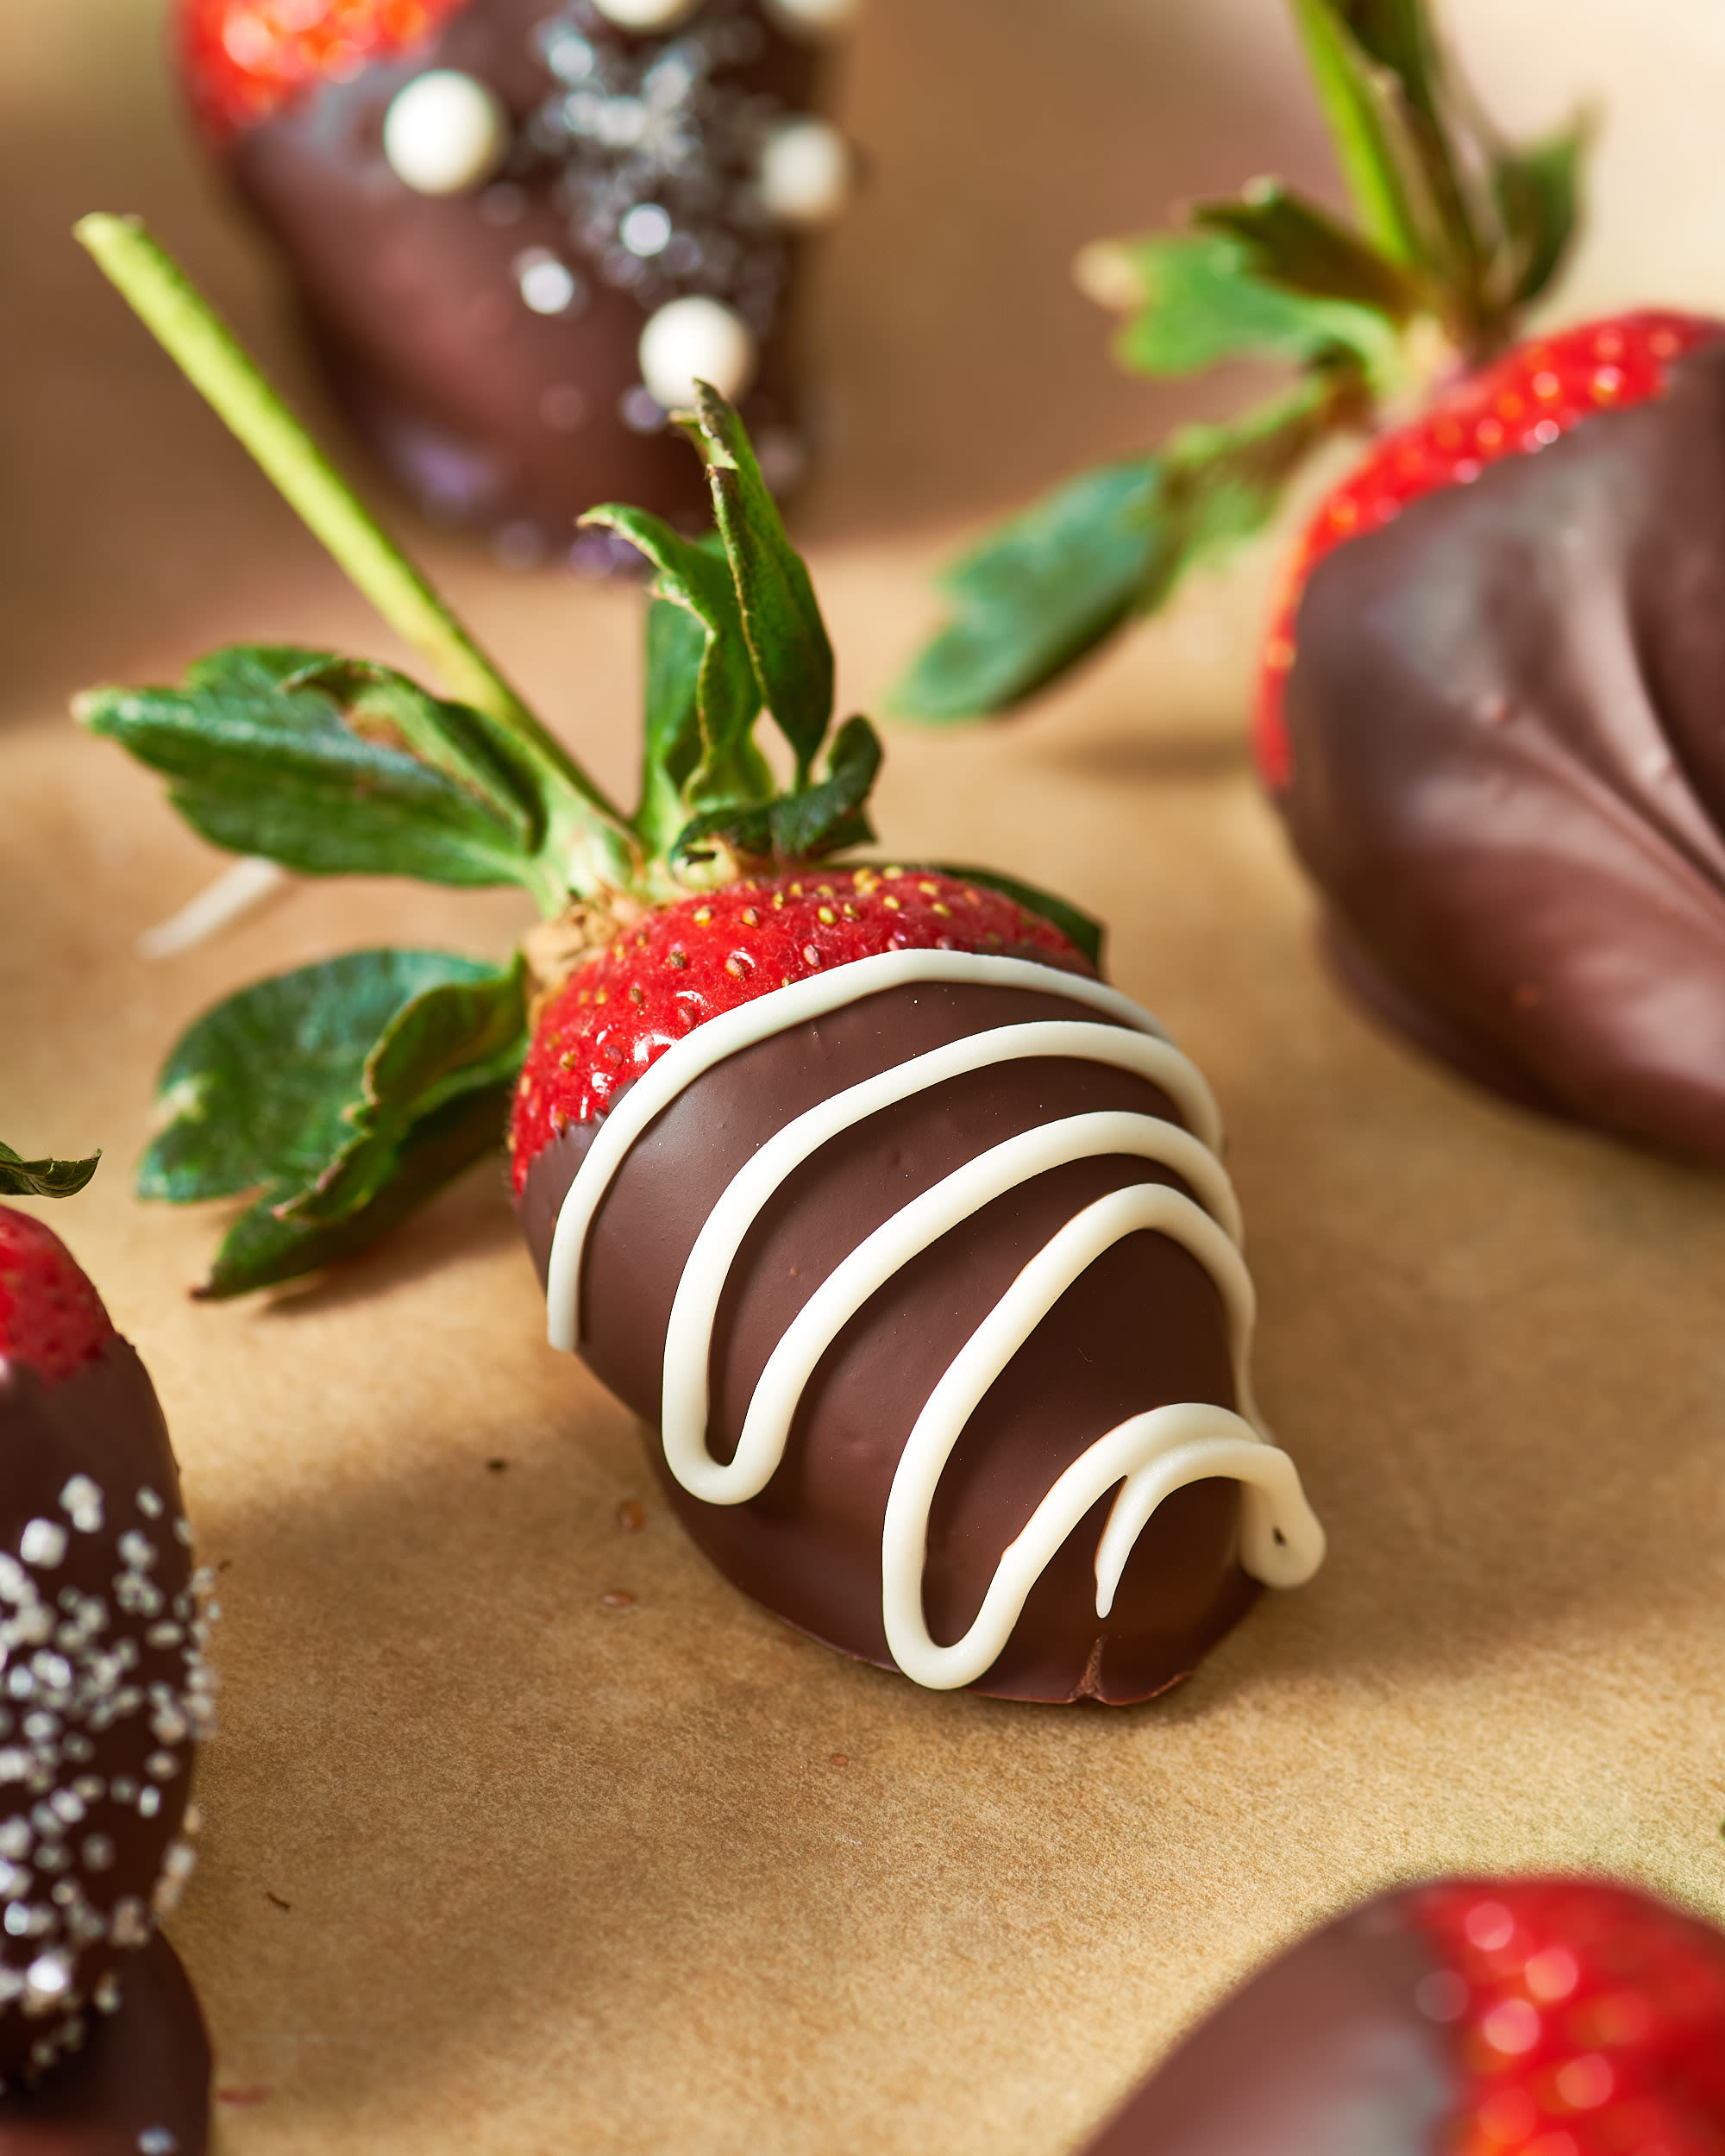 How To Make Chocolate-Covered Strawberries | Kitchn